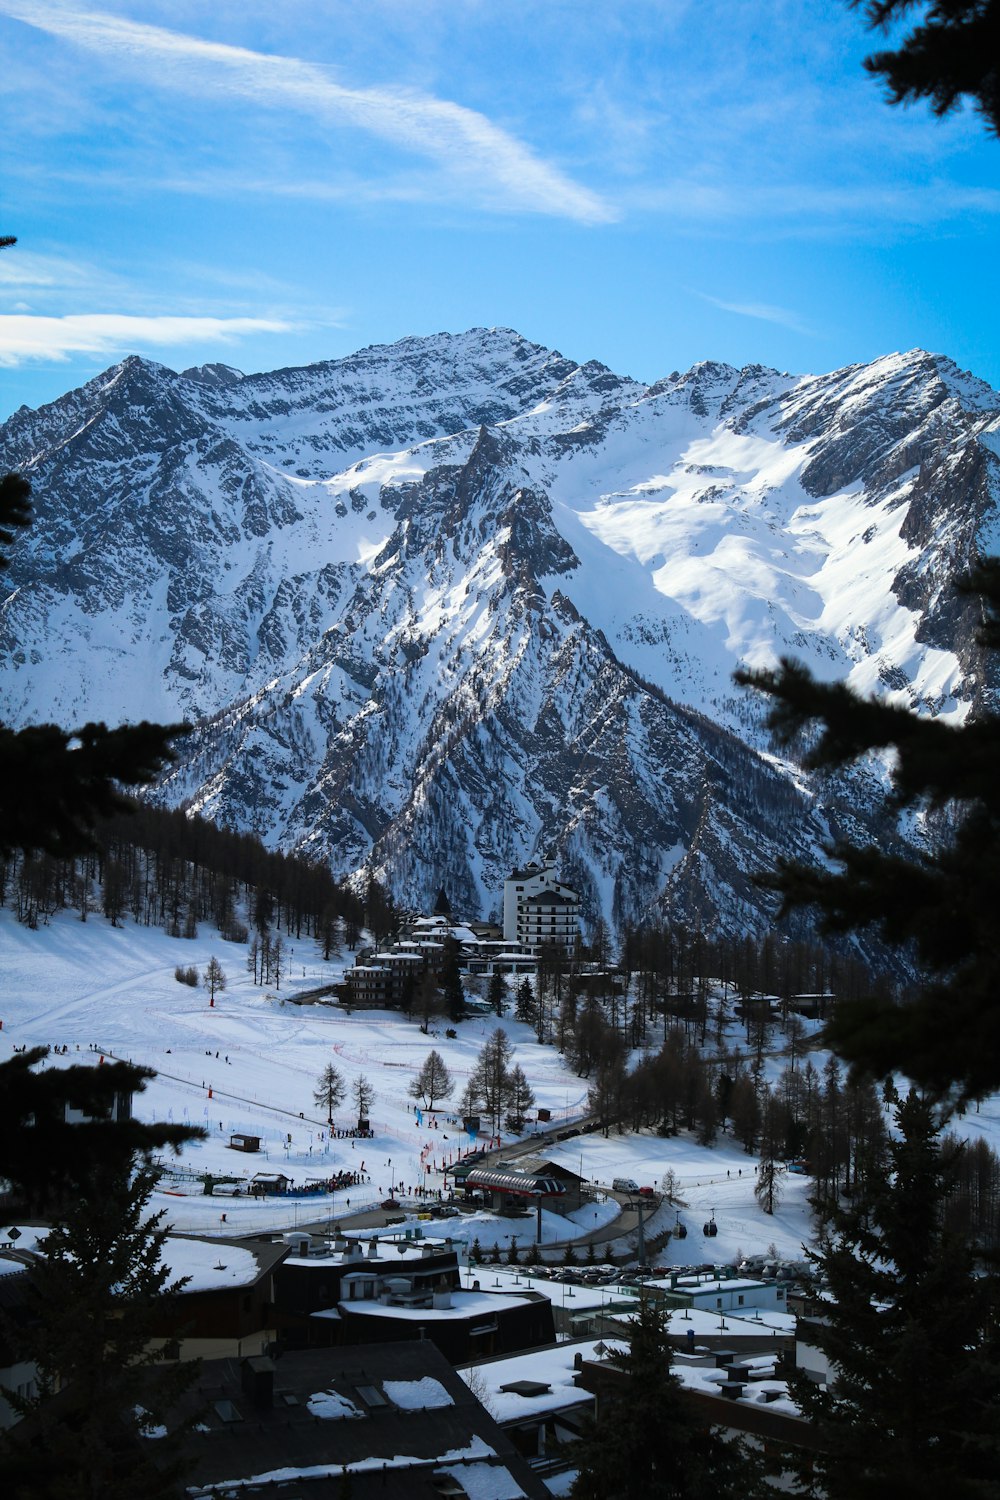 a snow covered mountain with a ski lodge in the foreground